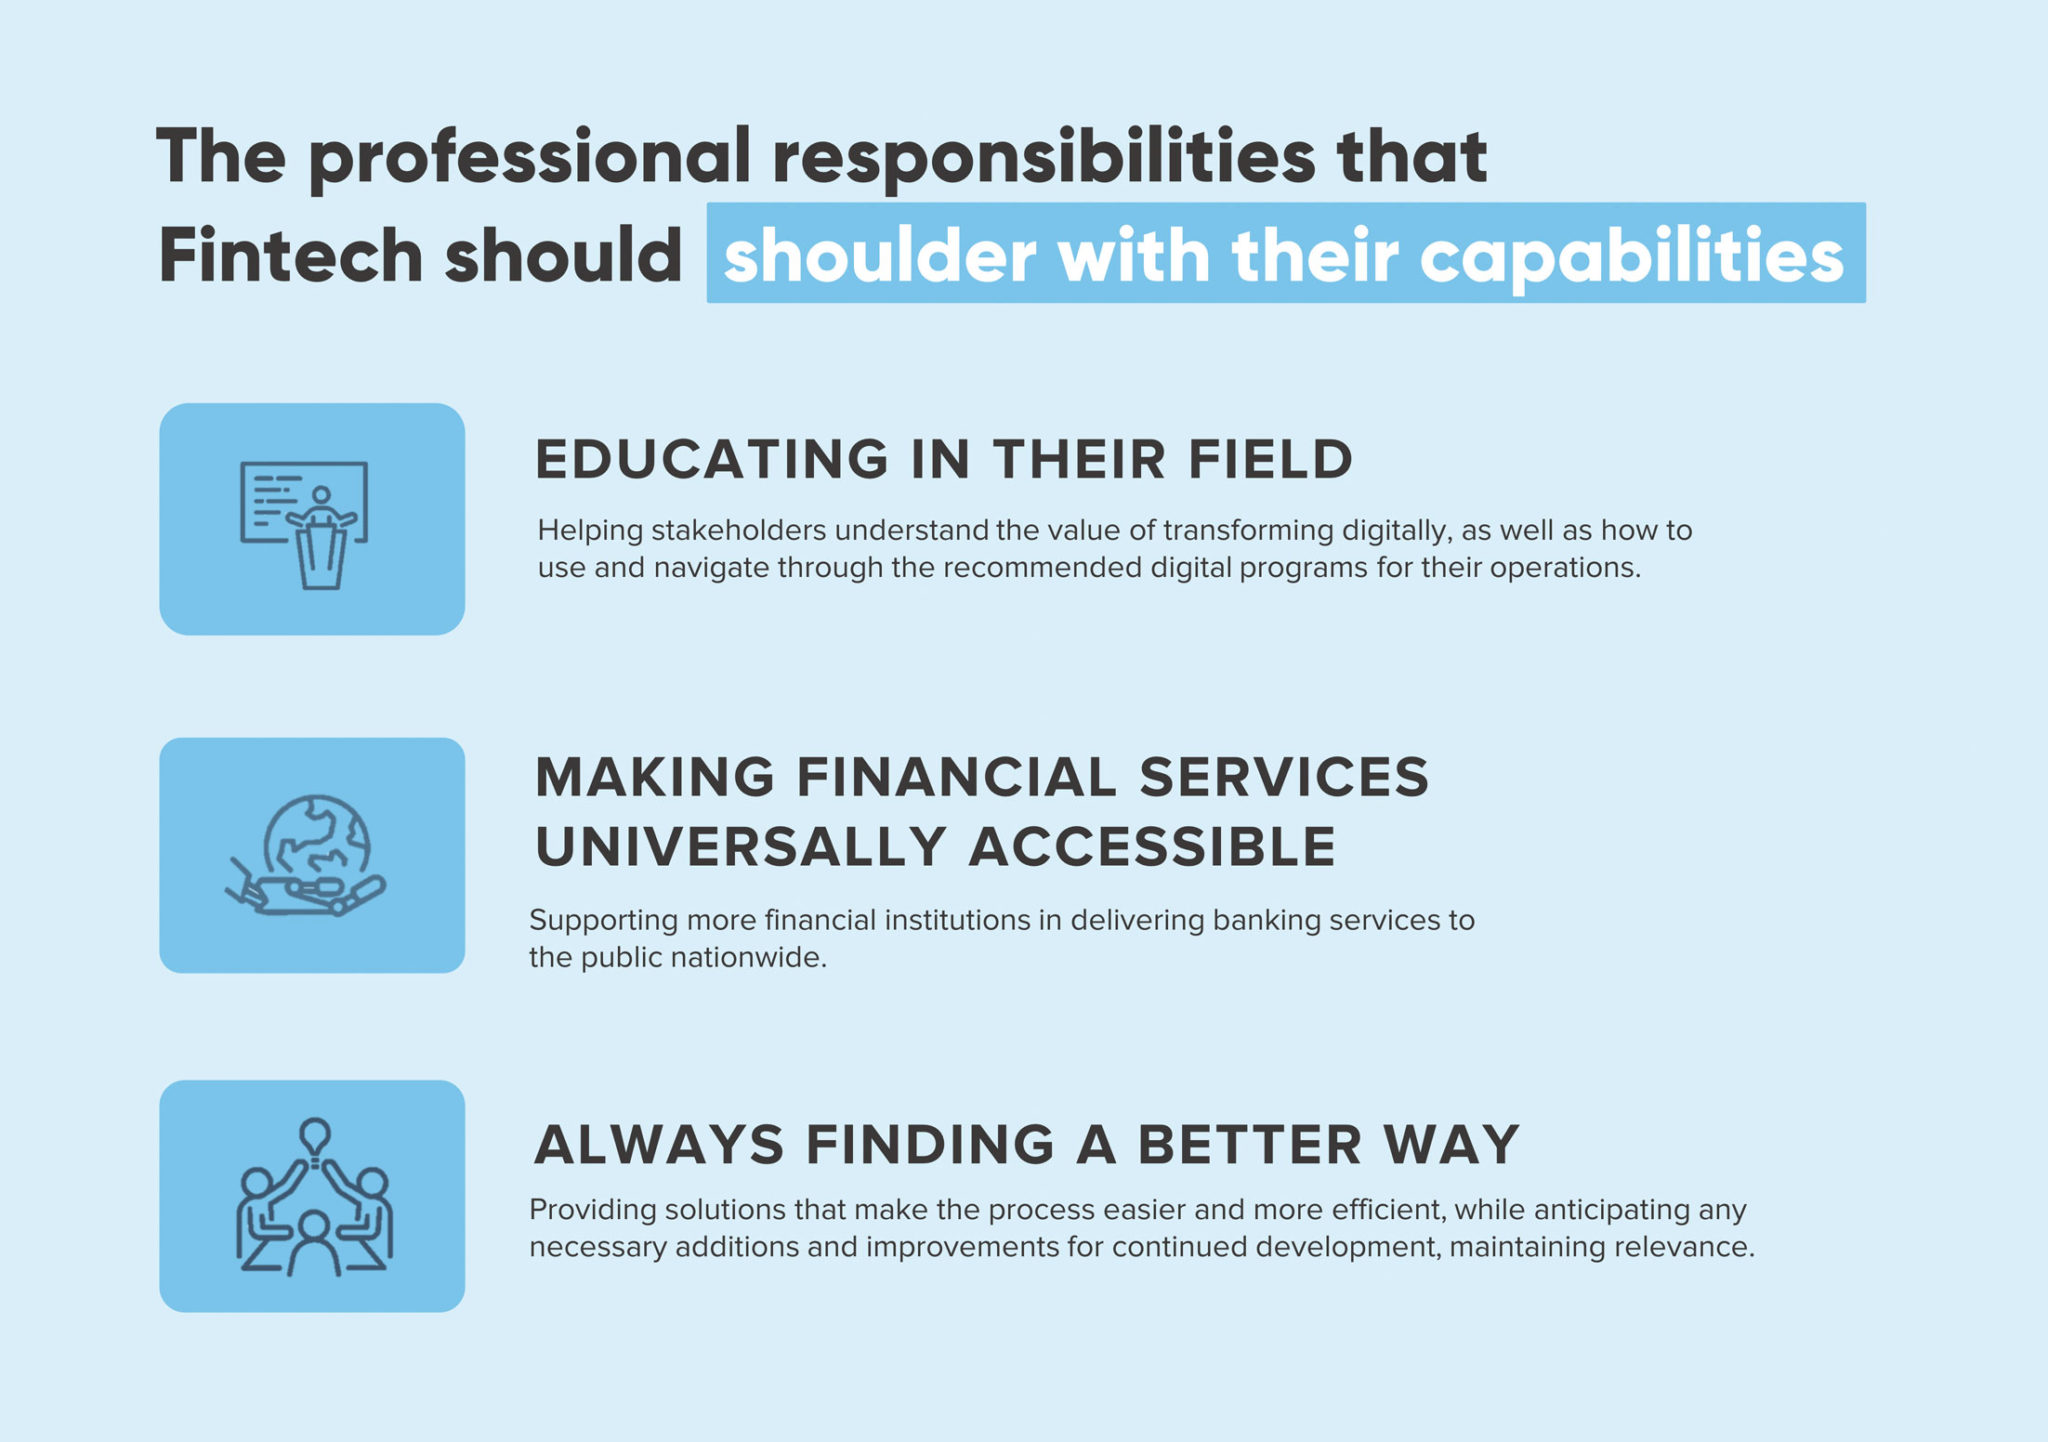 The Professional Responsibilities that Fintech should shoulder with their capabilities